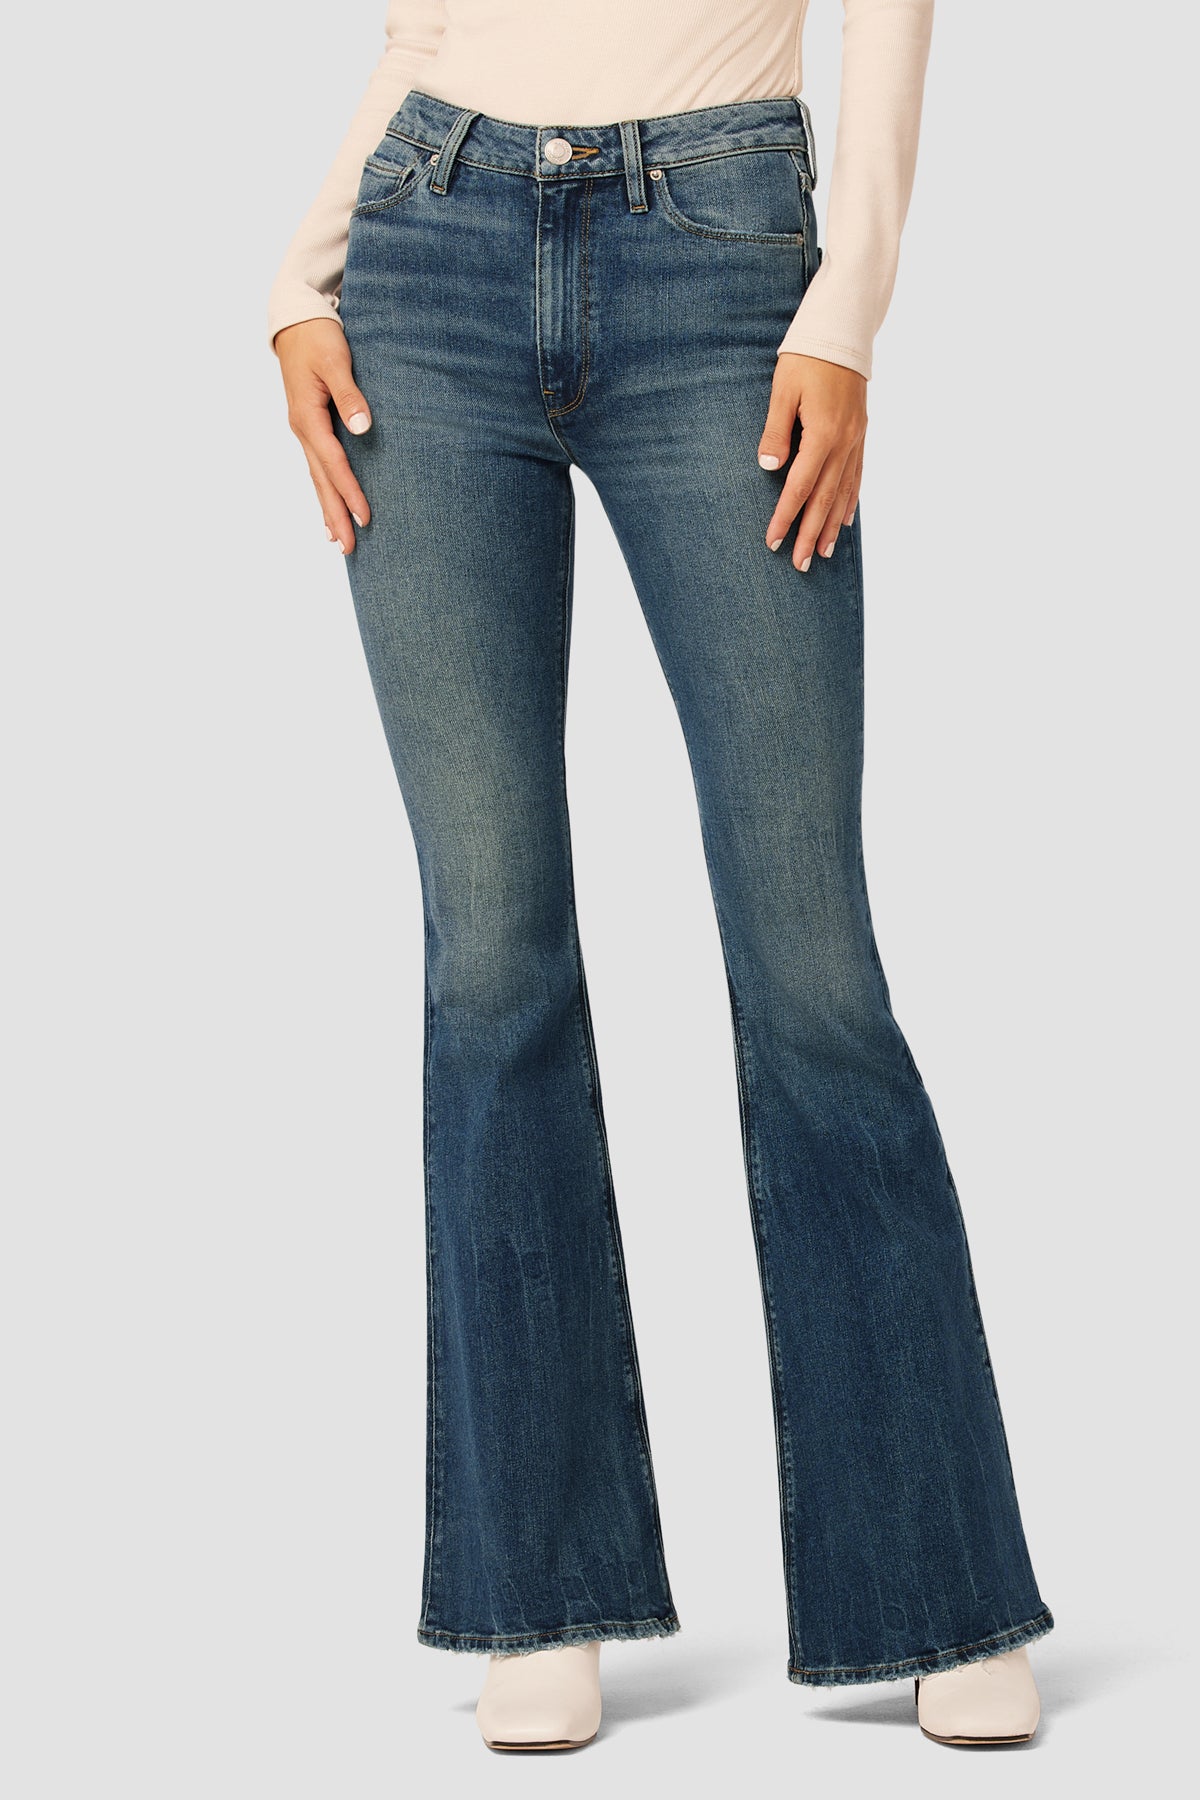 Hudson Jeans Holly High Rise Flared Stretch Denim Jeans